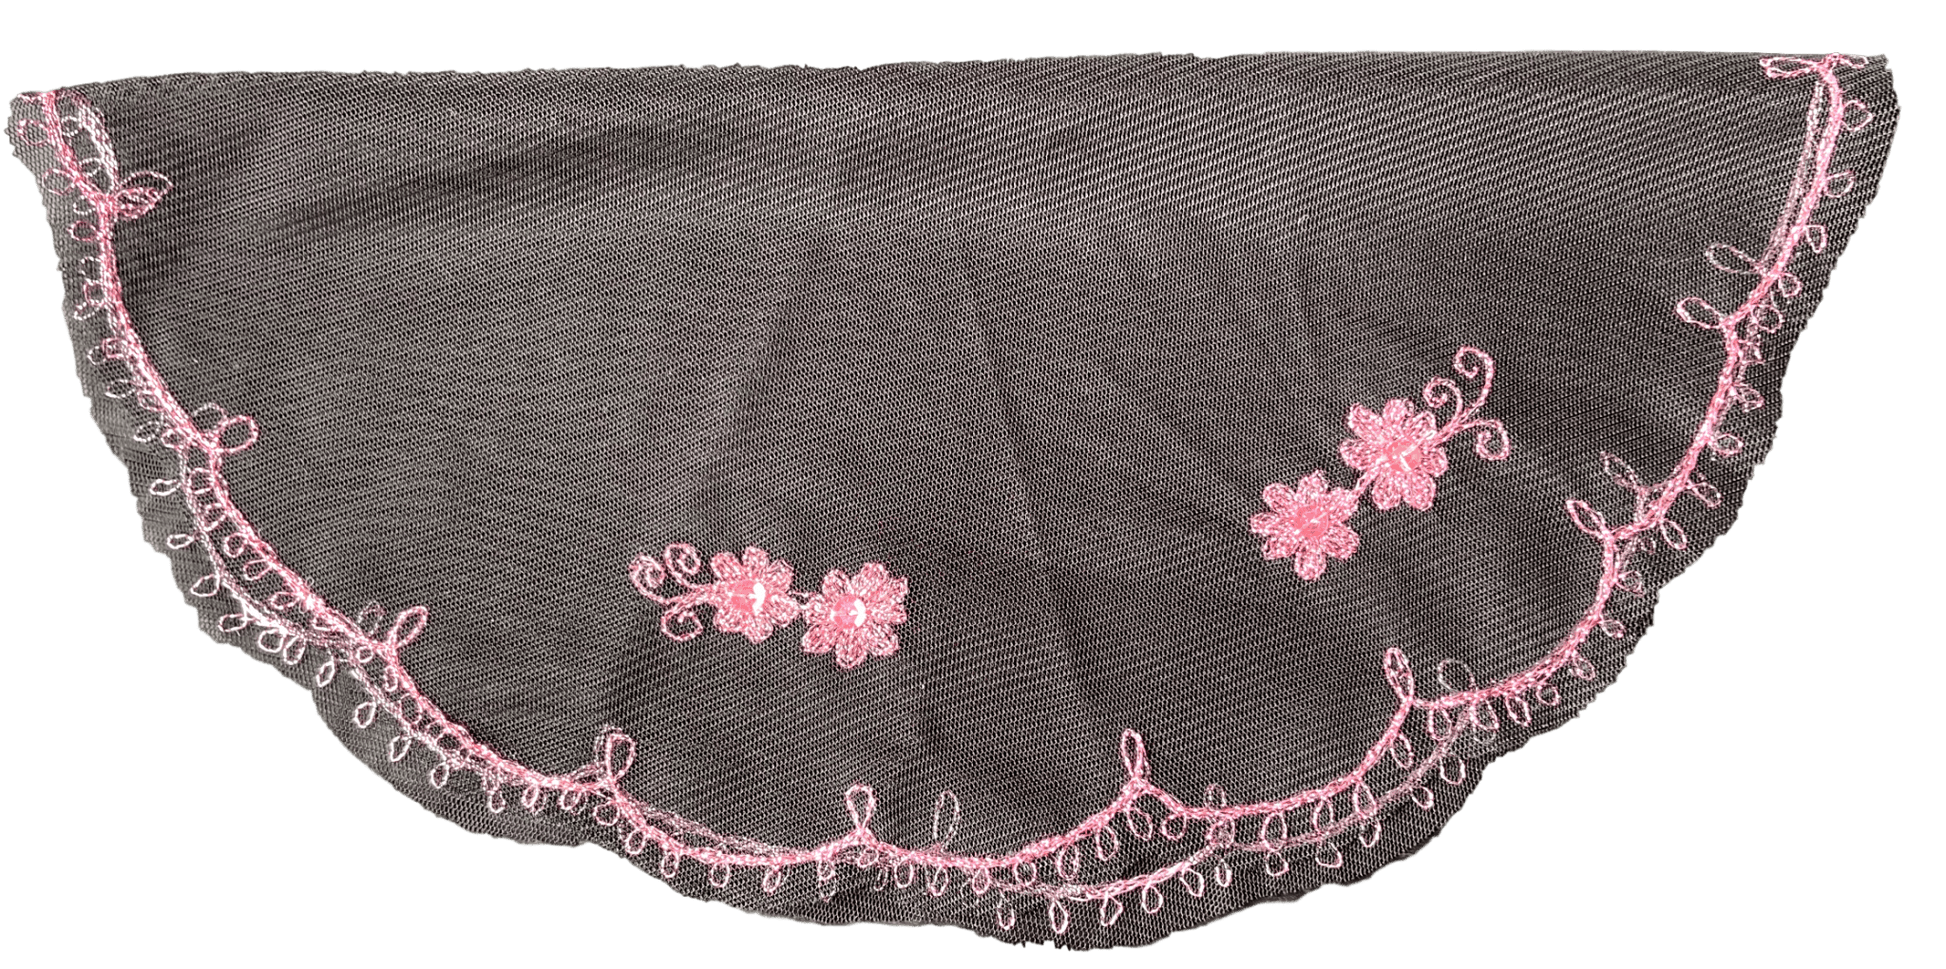 Sacrament Lace Veil Mass Head Coverings Mantilla Handcrafted Round Shape Black Detailing Pink